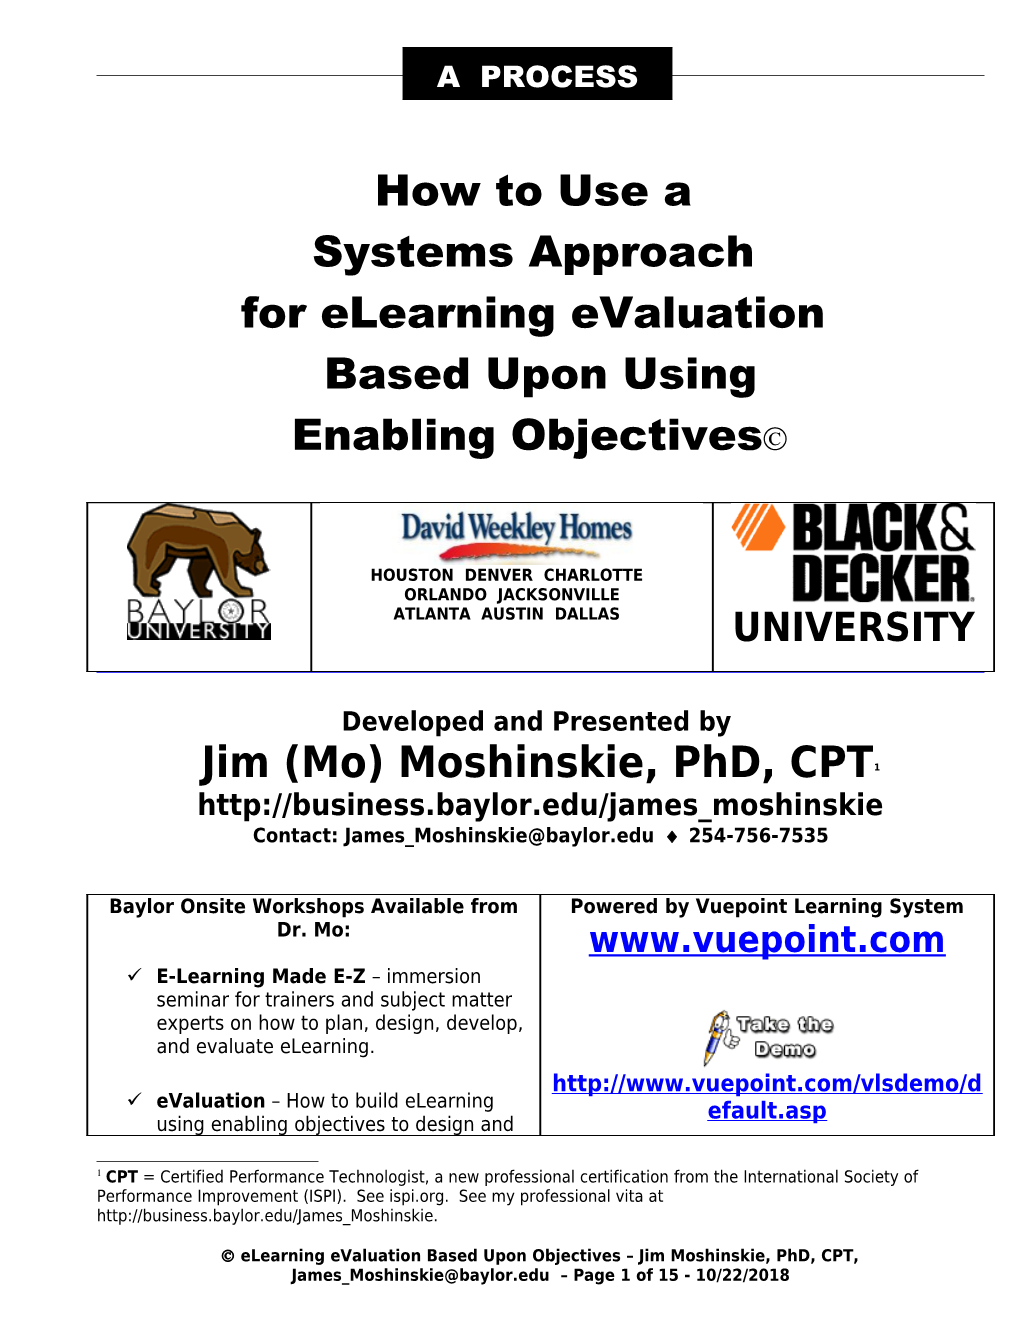 Systems Approach for Elearning Evaluation Based Upon Using